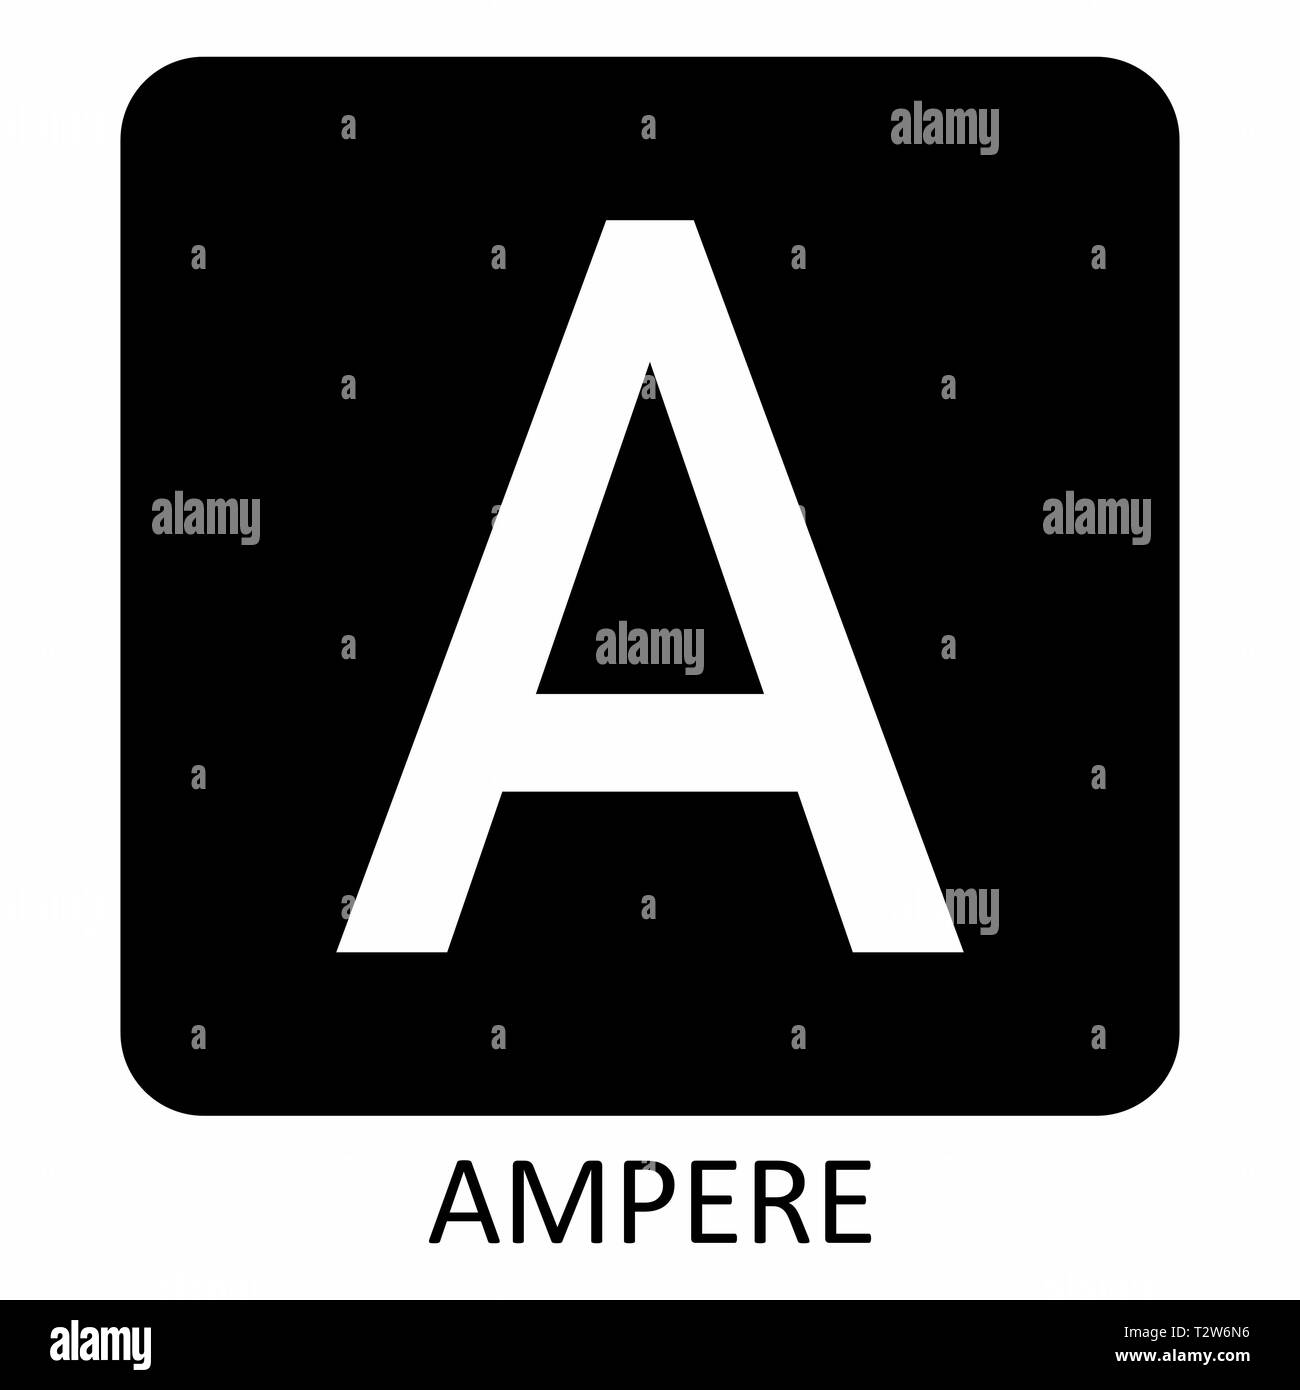 Ampere Black and White Stock Photos & Images - Alamy